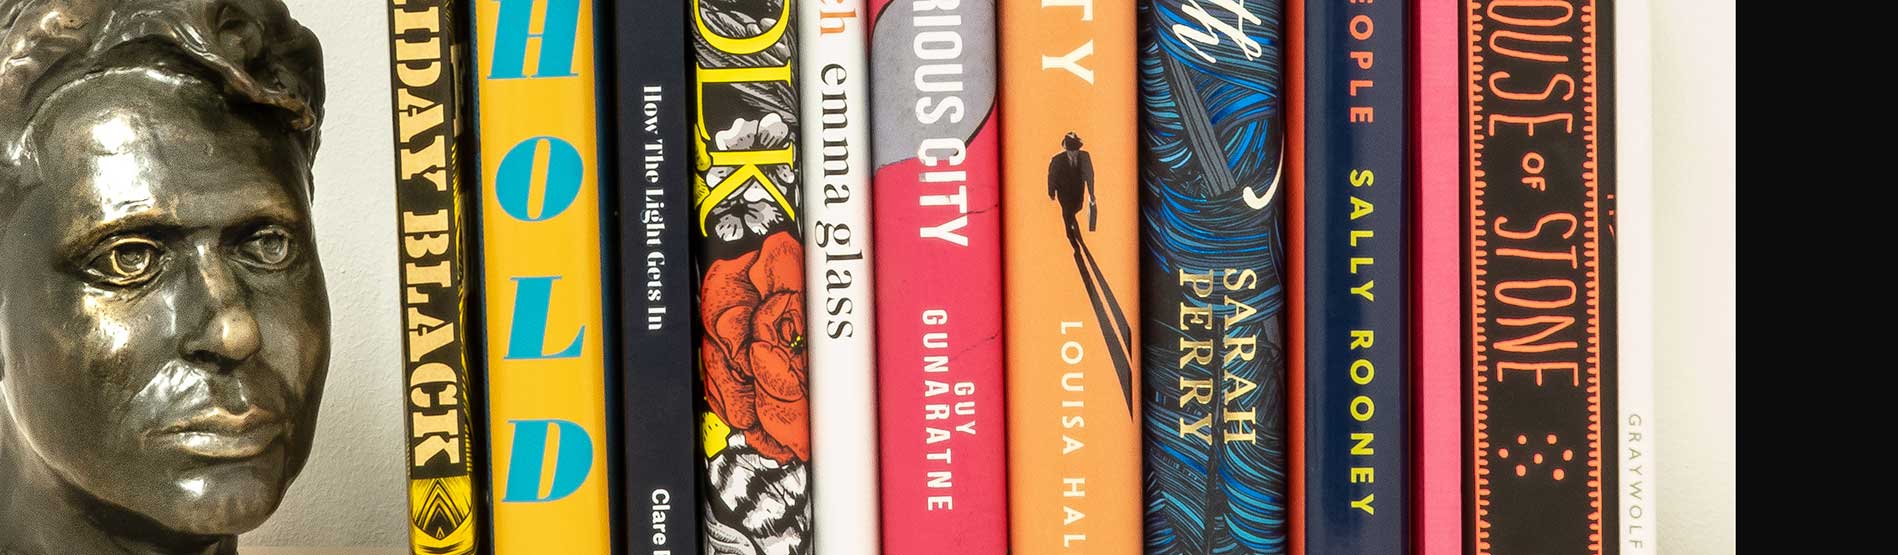 2019 Longlisted Books